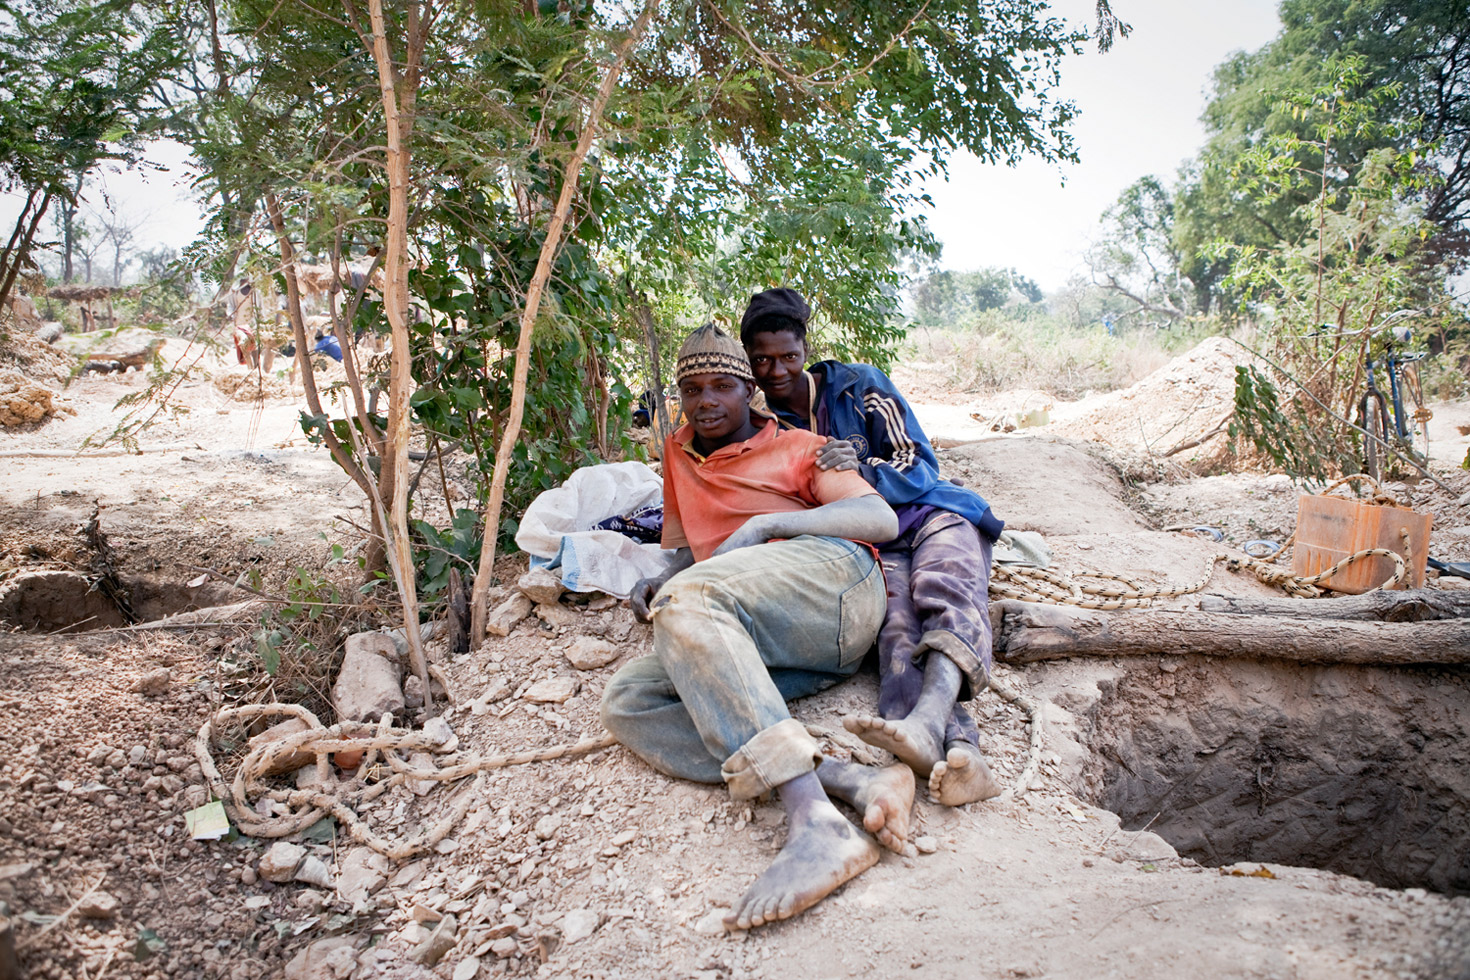 A two man team of migrant miners from Guinea relax next to their mine shaft in Senegal. Each takes it in turns to go down the 10 meter shaft for up to one hour at a time to extract gold-bearing rocks.